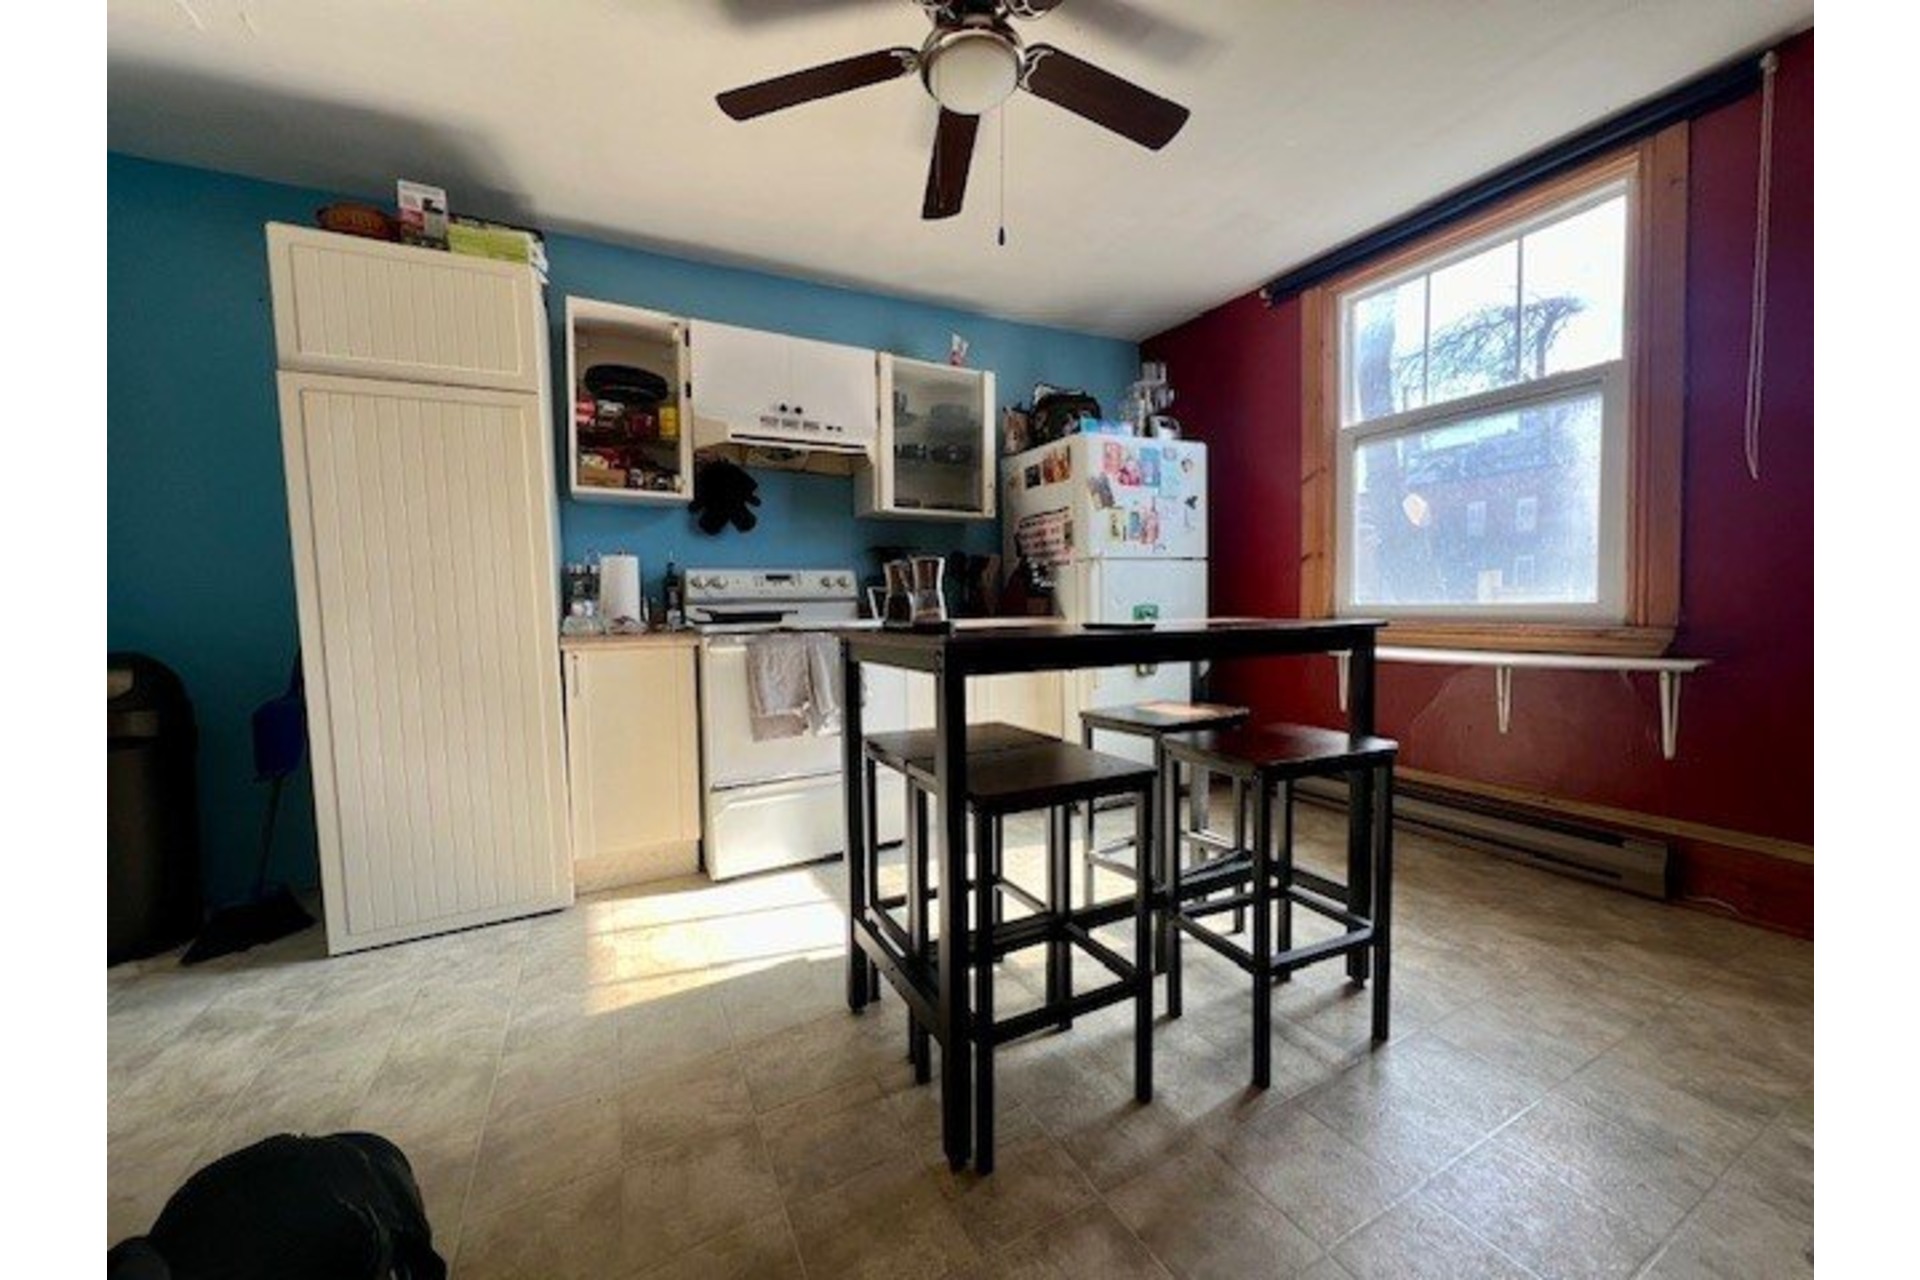 image 14 - Quintuplex For sale Hull Gatineau  - 4 rooms